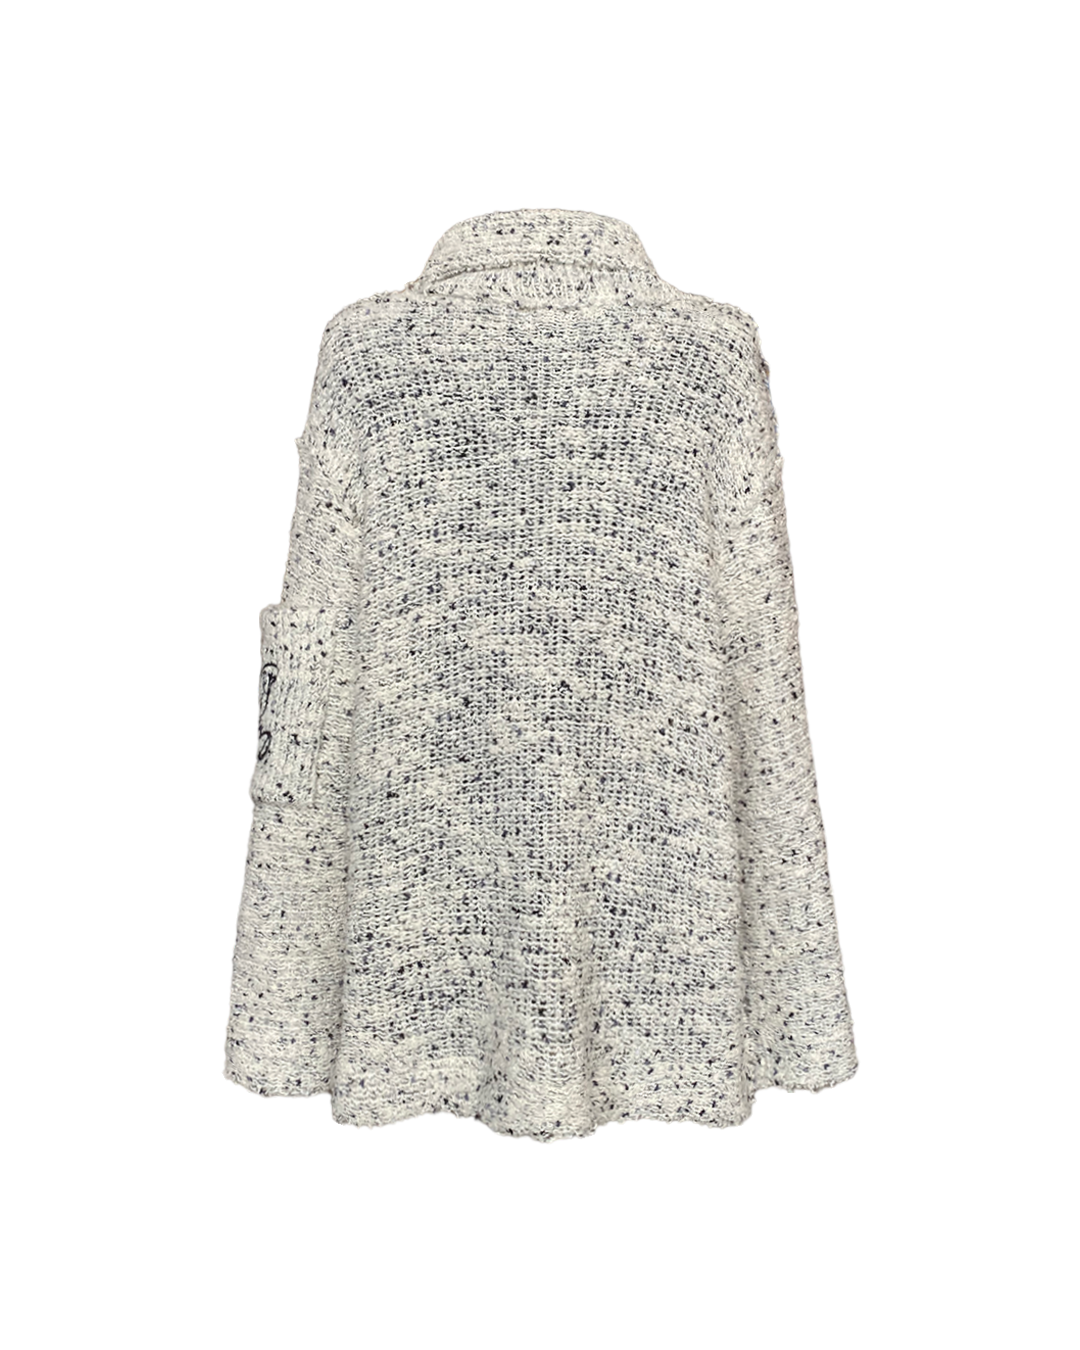 BLACK AND WHITE BOUCLE JUMPER WITH POCKET AW23/24